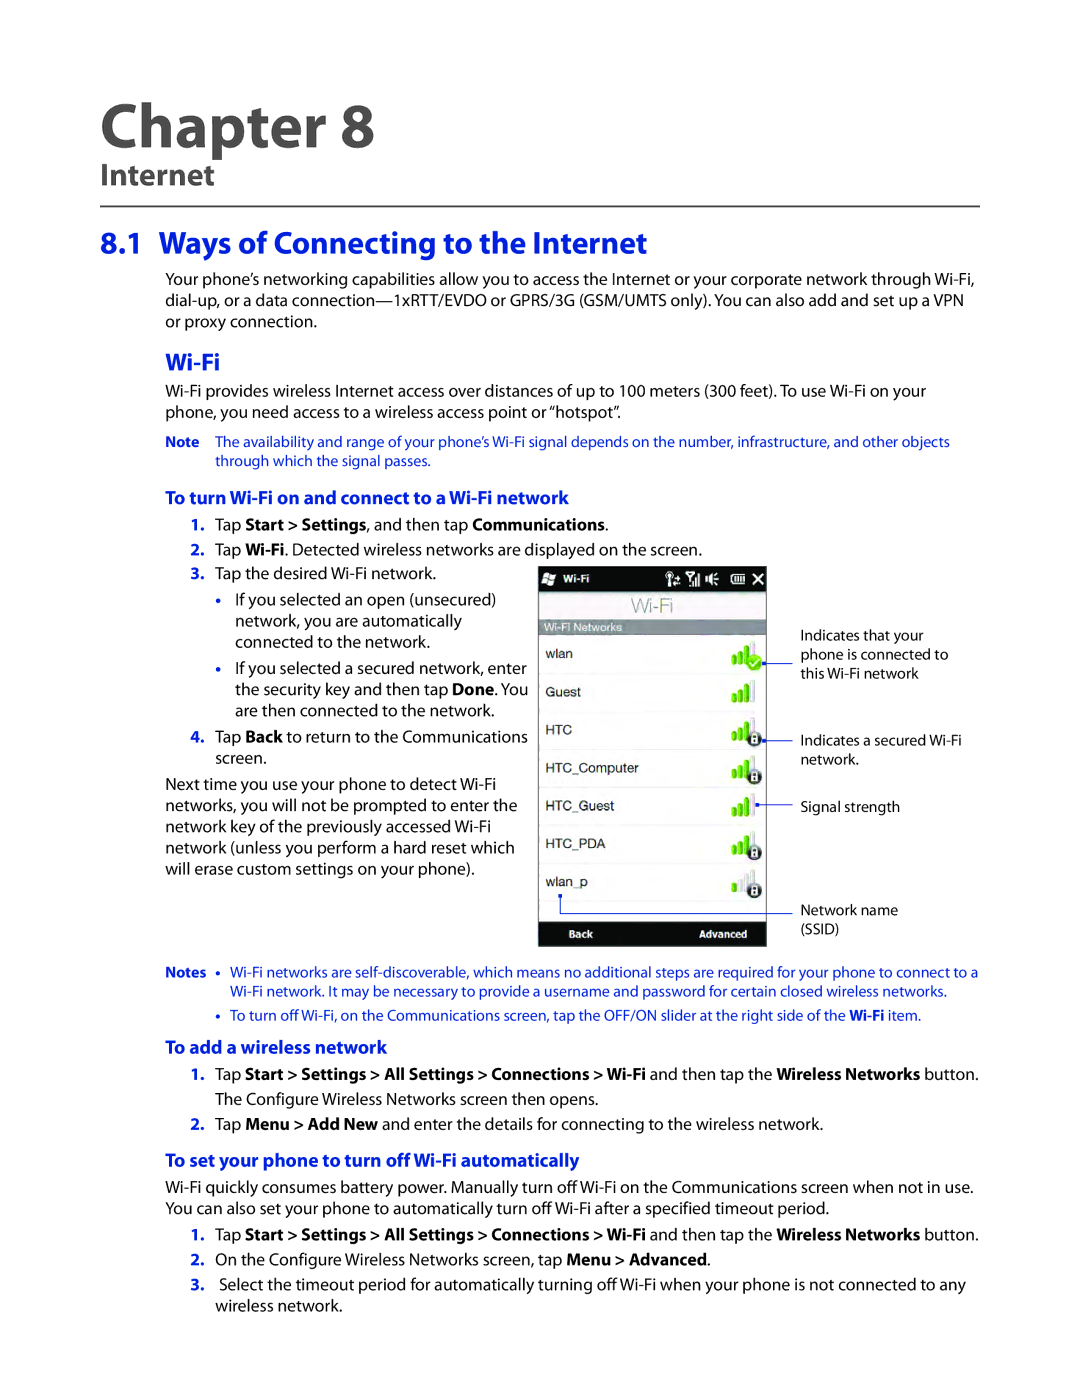 HTC TOUCHPRO2SPT user manual Ways of Connecting to the Internet, Wi-Fi 